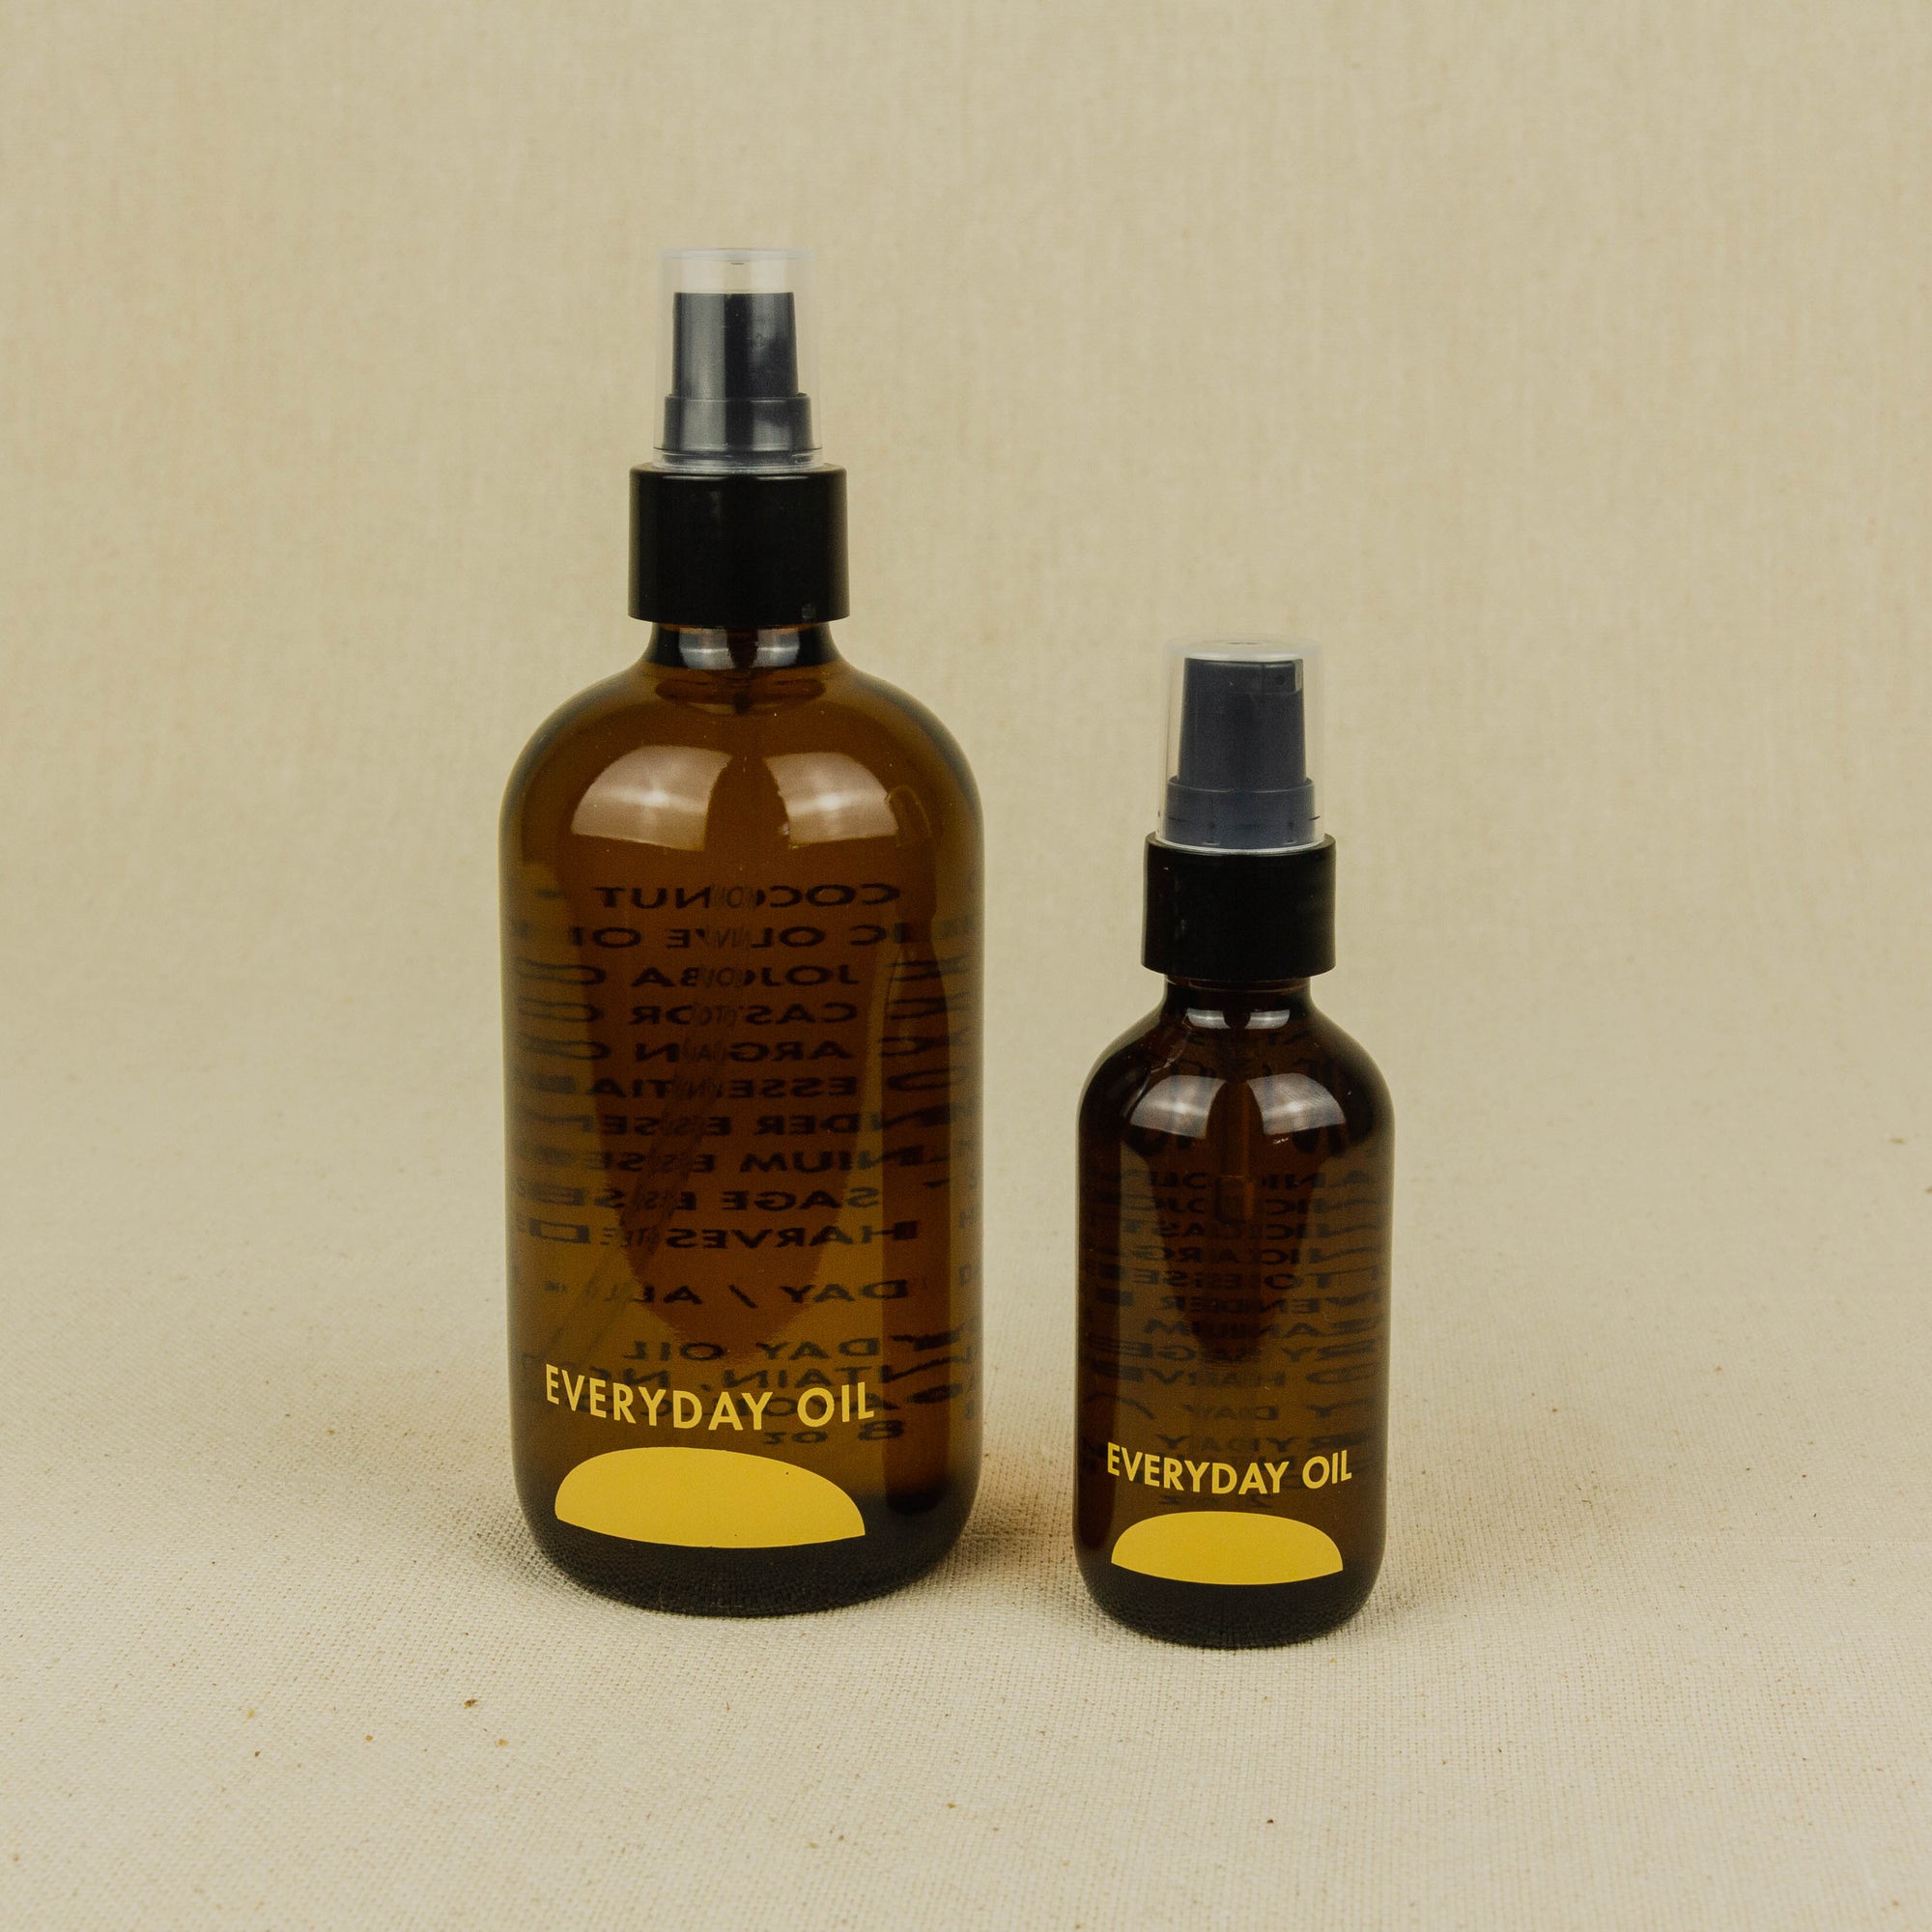 Everyday Oil - Mainstay Blend two sizes